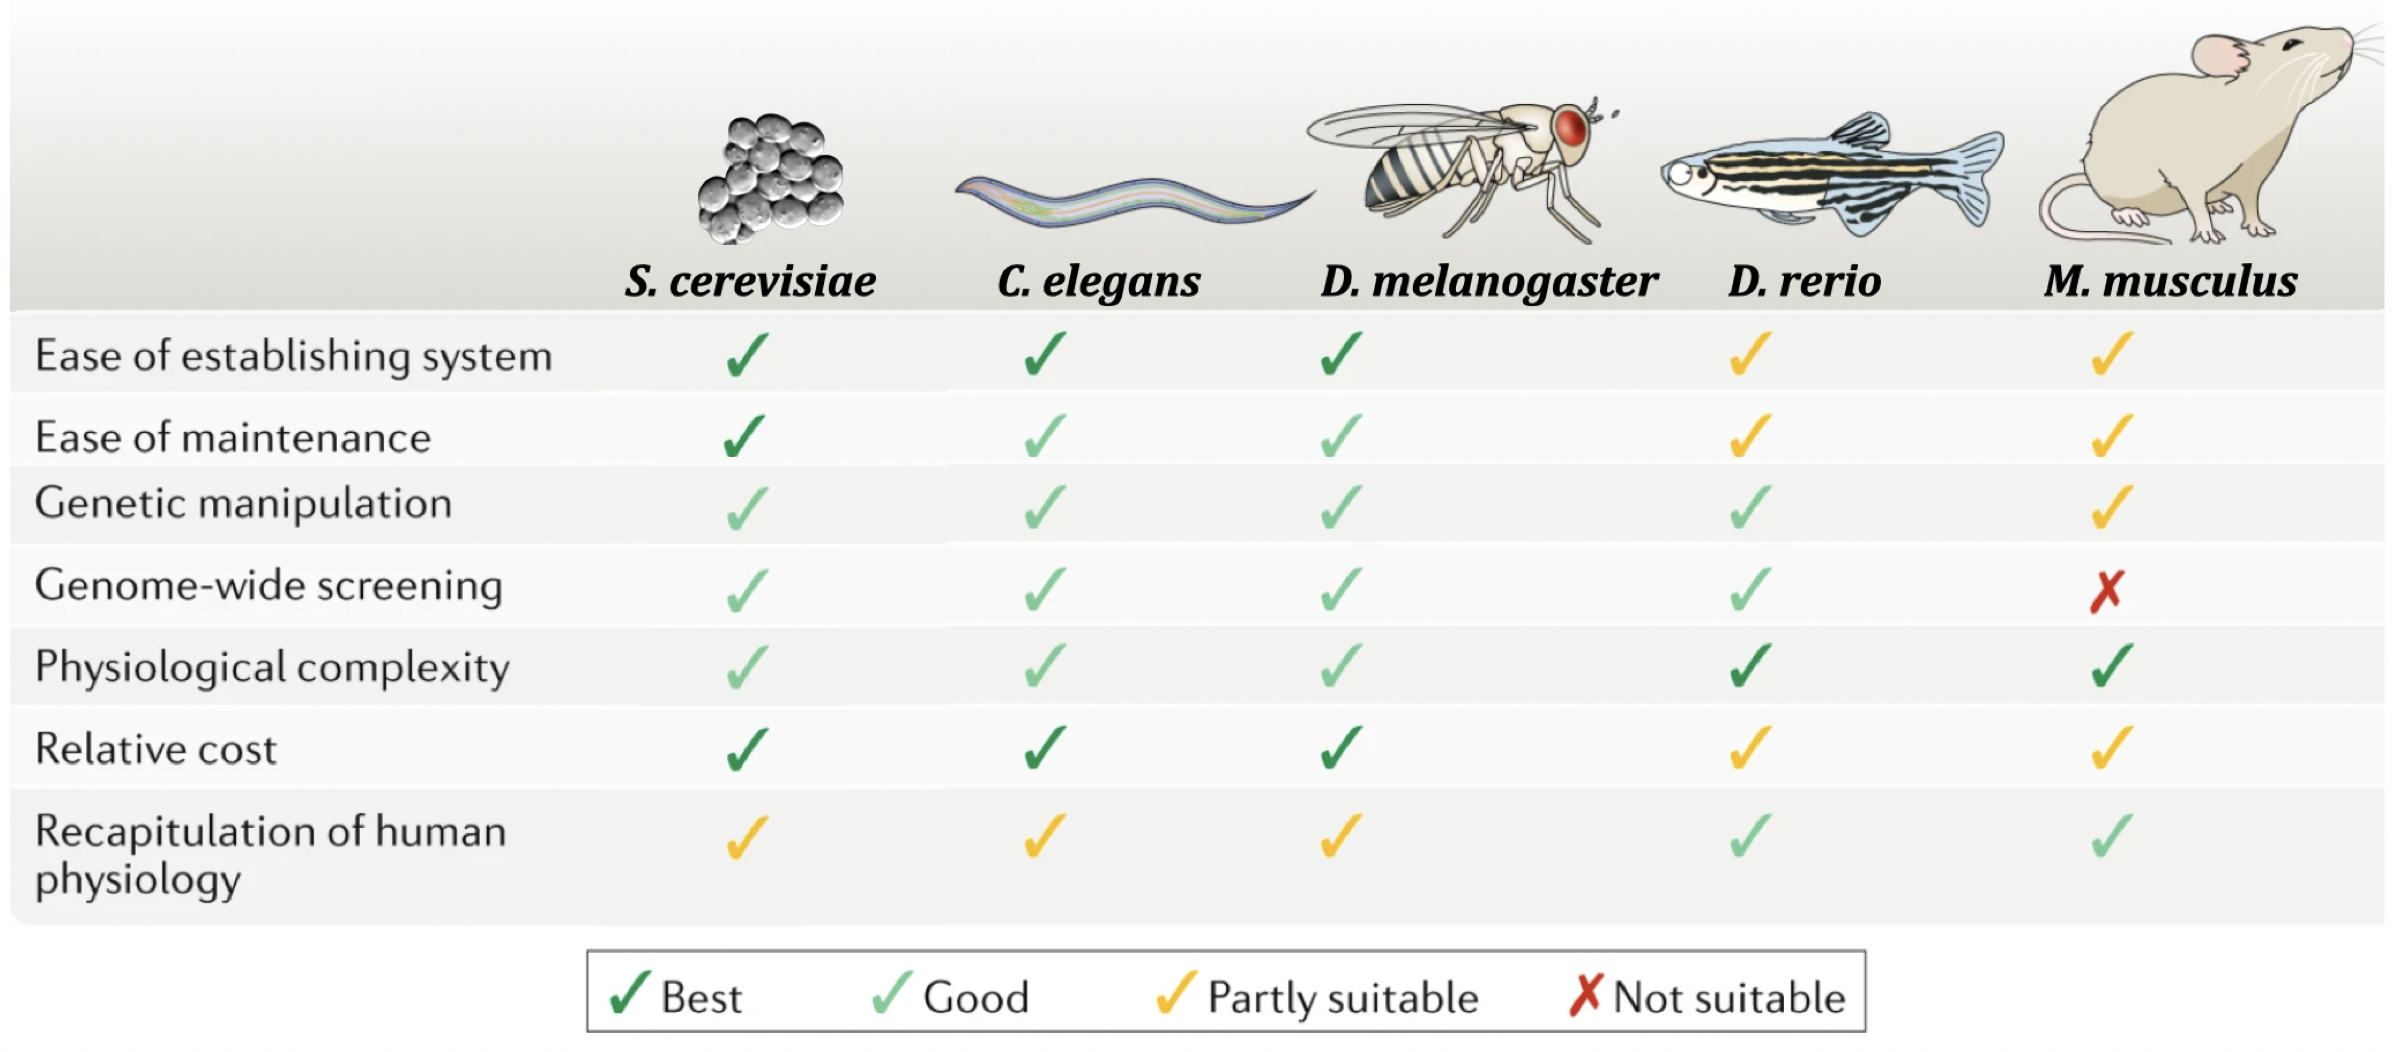 Popular model orgsanisms used in genetic and biomedical research. Advantages and disadvantages are listed from cheapest (yeast) to most expensive (mice). This image was modified from Kim et al. 2020, Nature Reviews Molecular Cell Biology